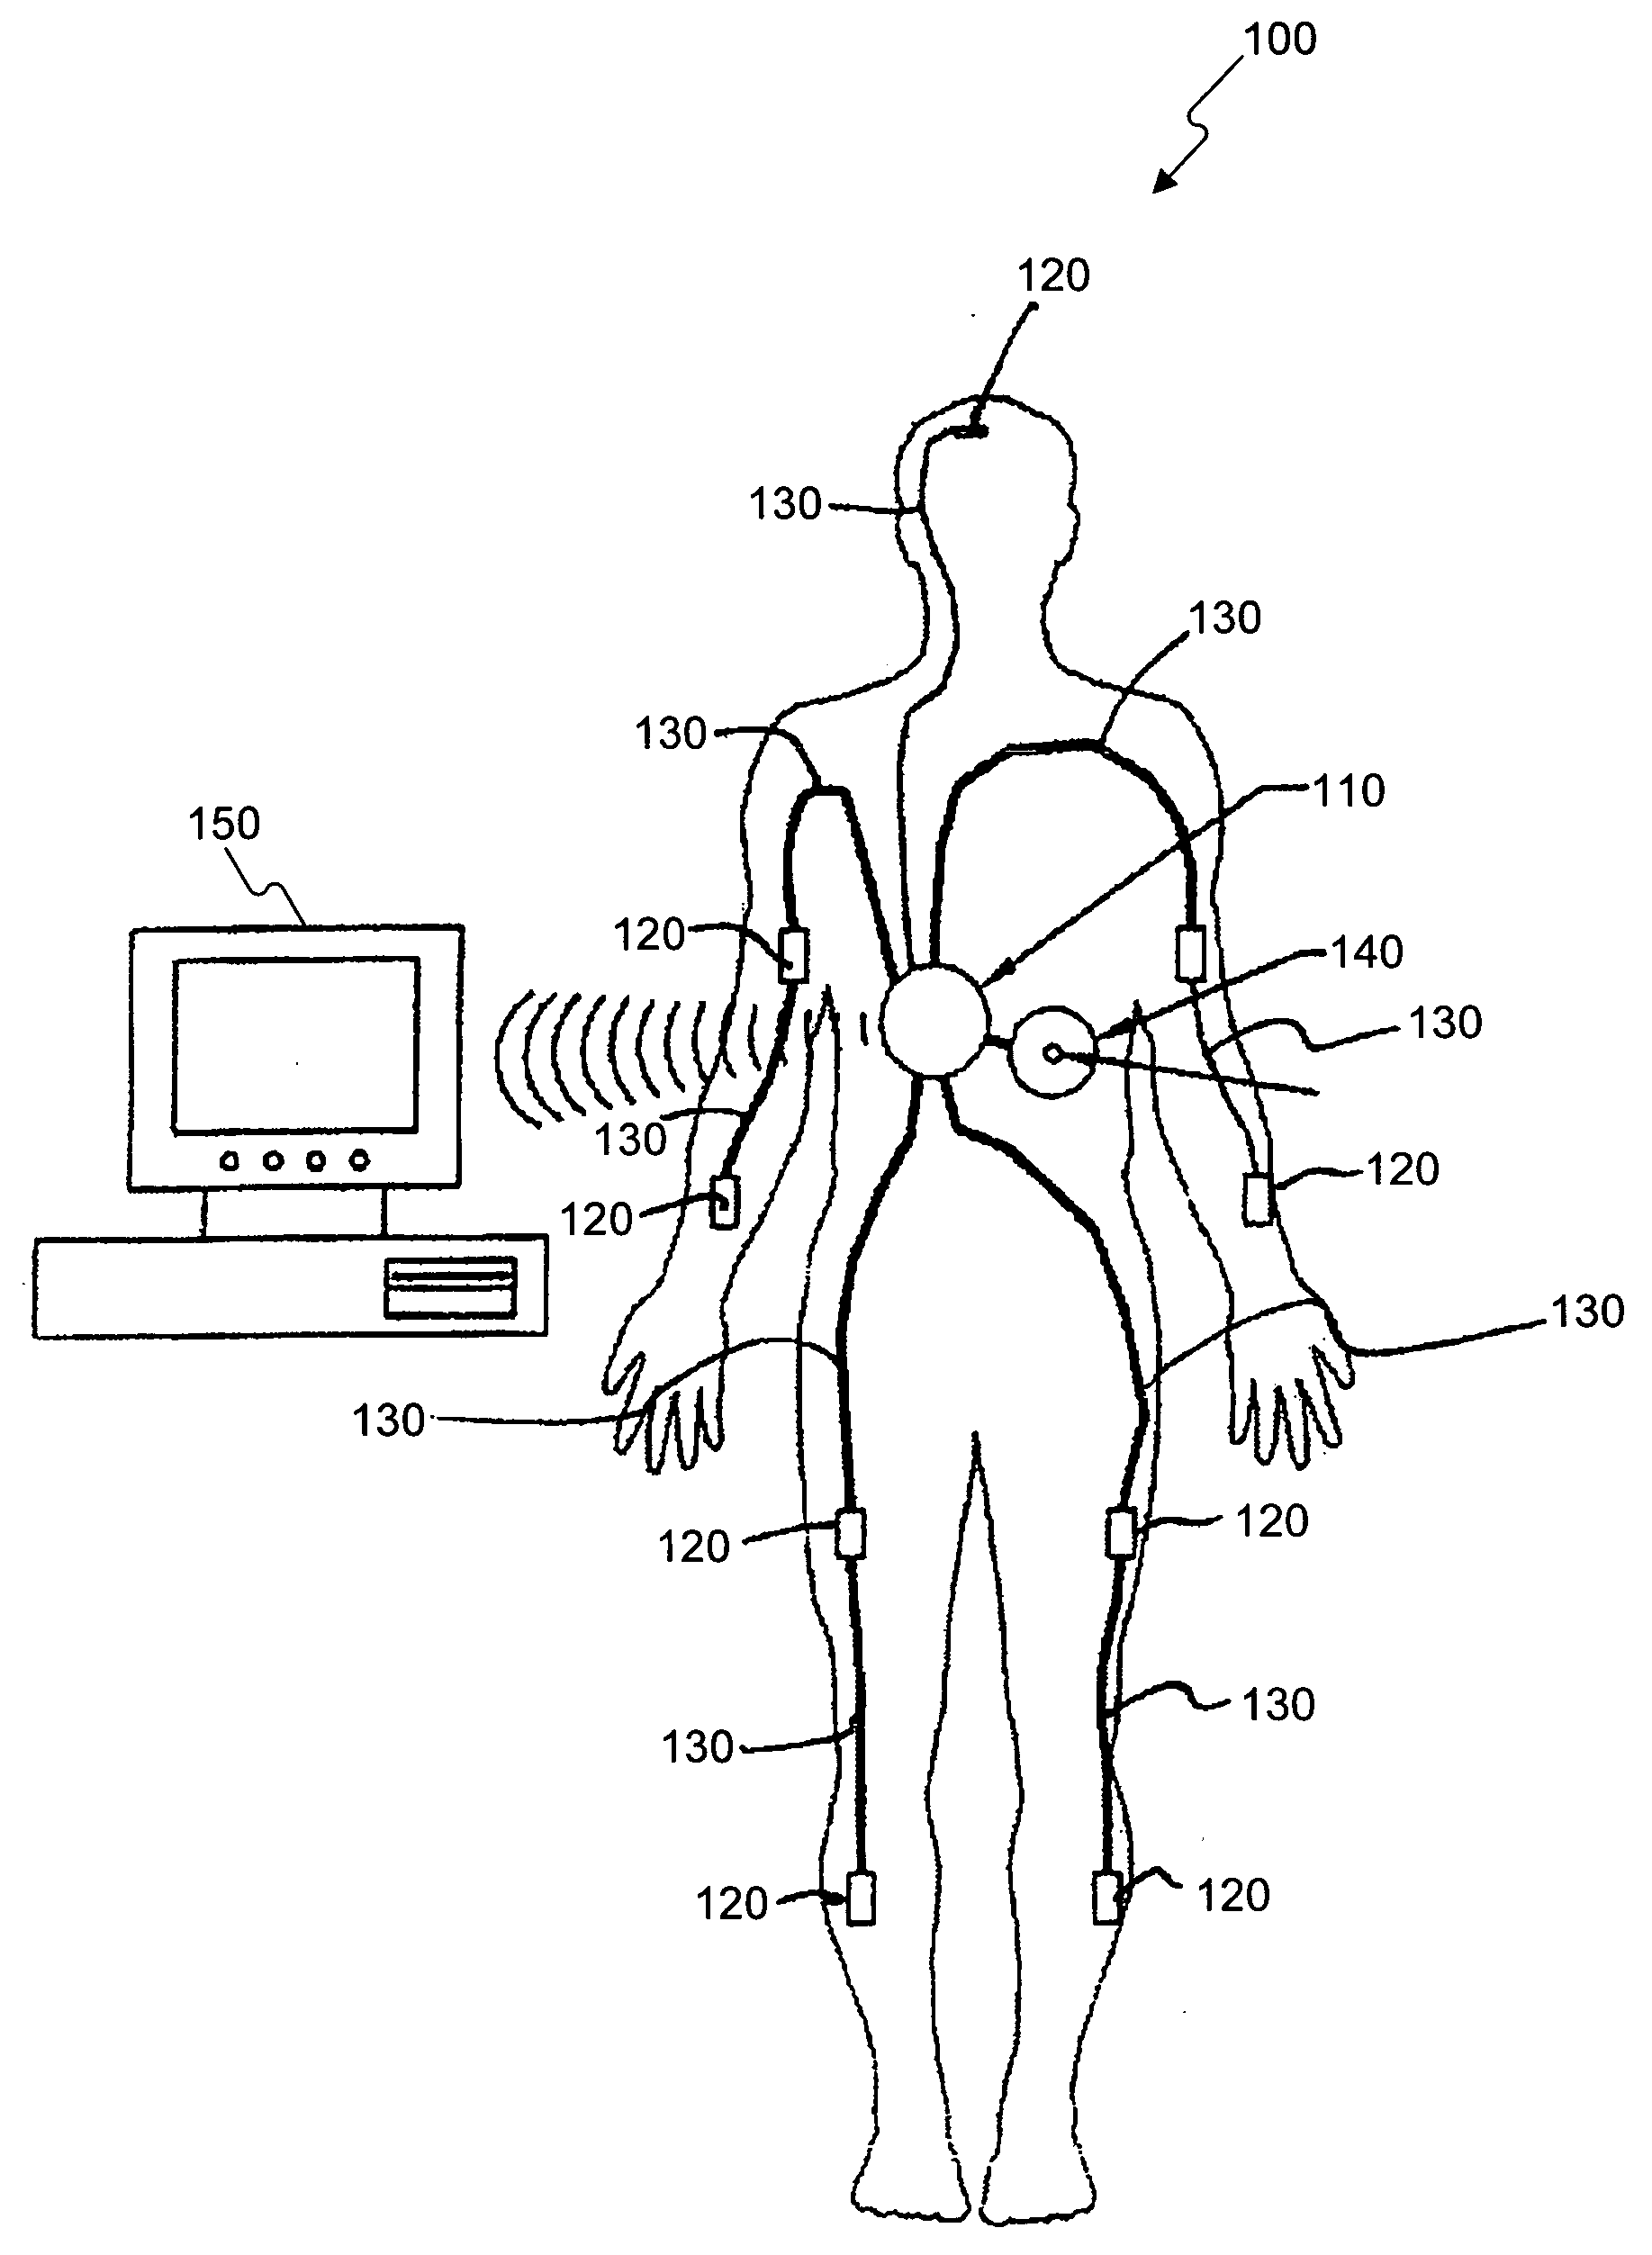 Agent delivery systems and related methods under control of biological electrical signals